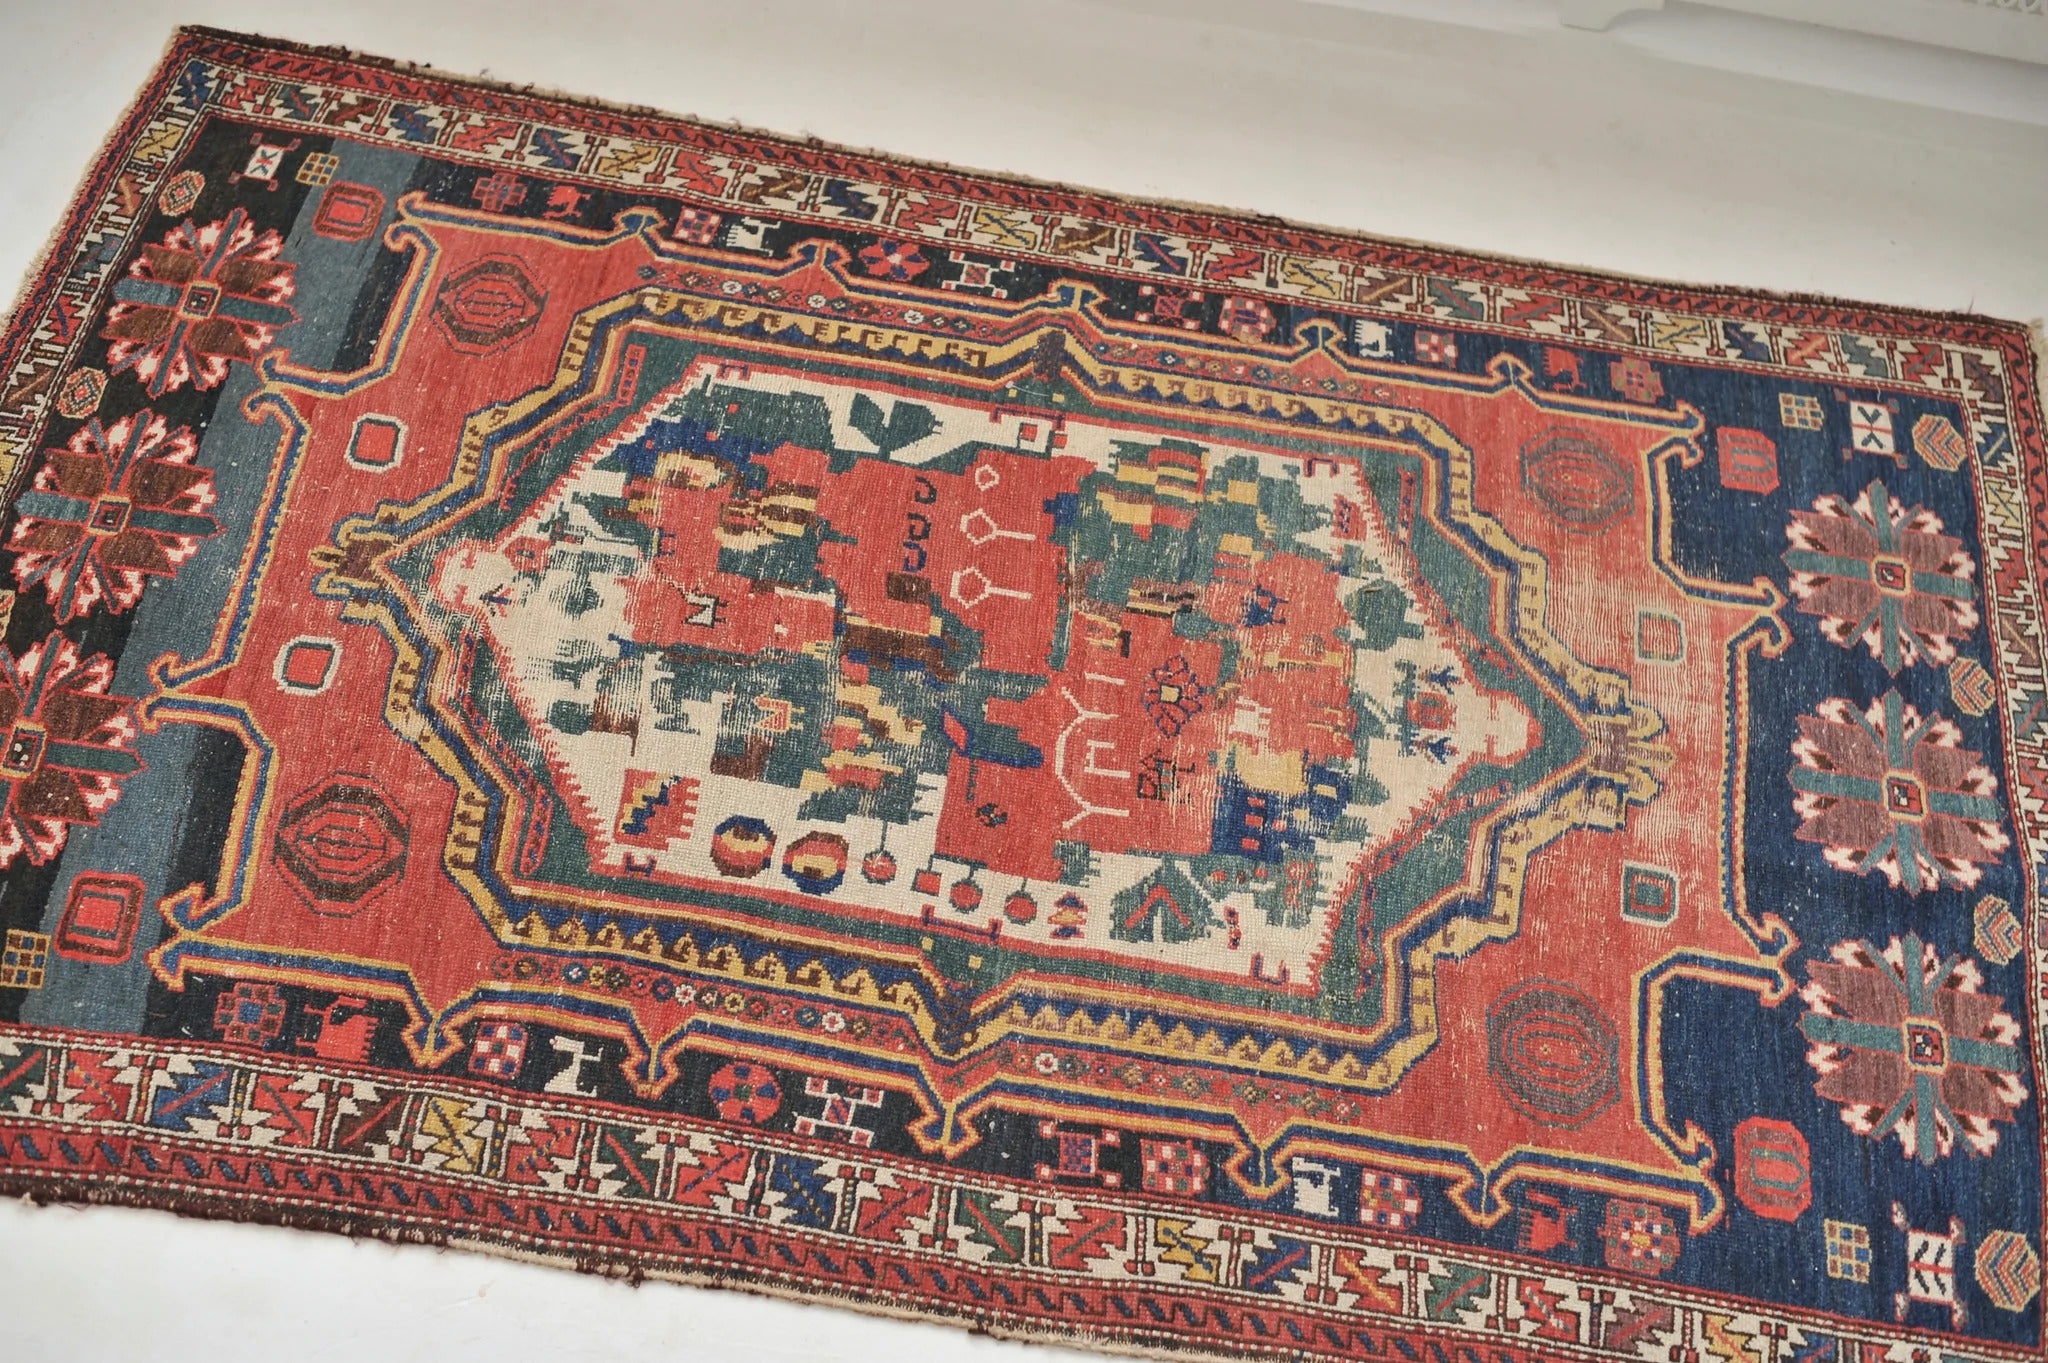 Zargos Folklore Wonderful Landscape Depiction Village Antique Rug

About: If you are an artist or any sort, or simply appreciate good quality and unique piece of art - then you will love this soulful and funky village rug woven with an abundance of